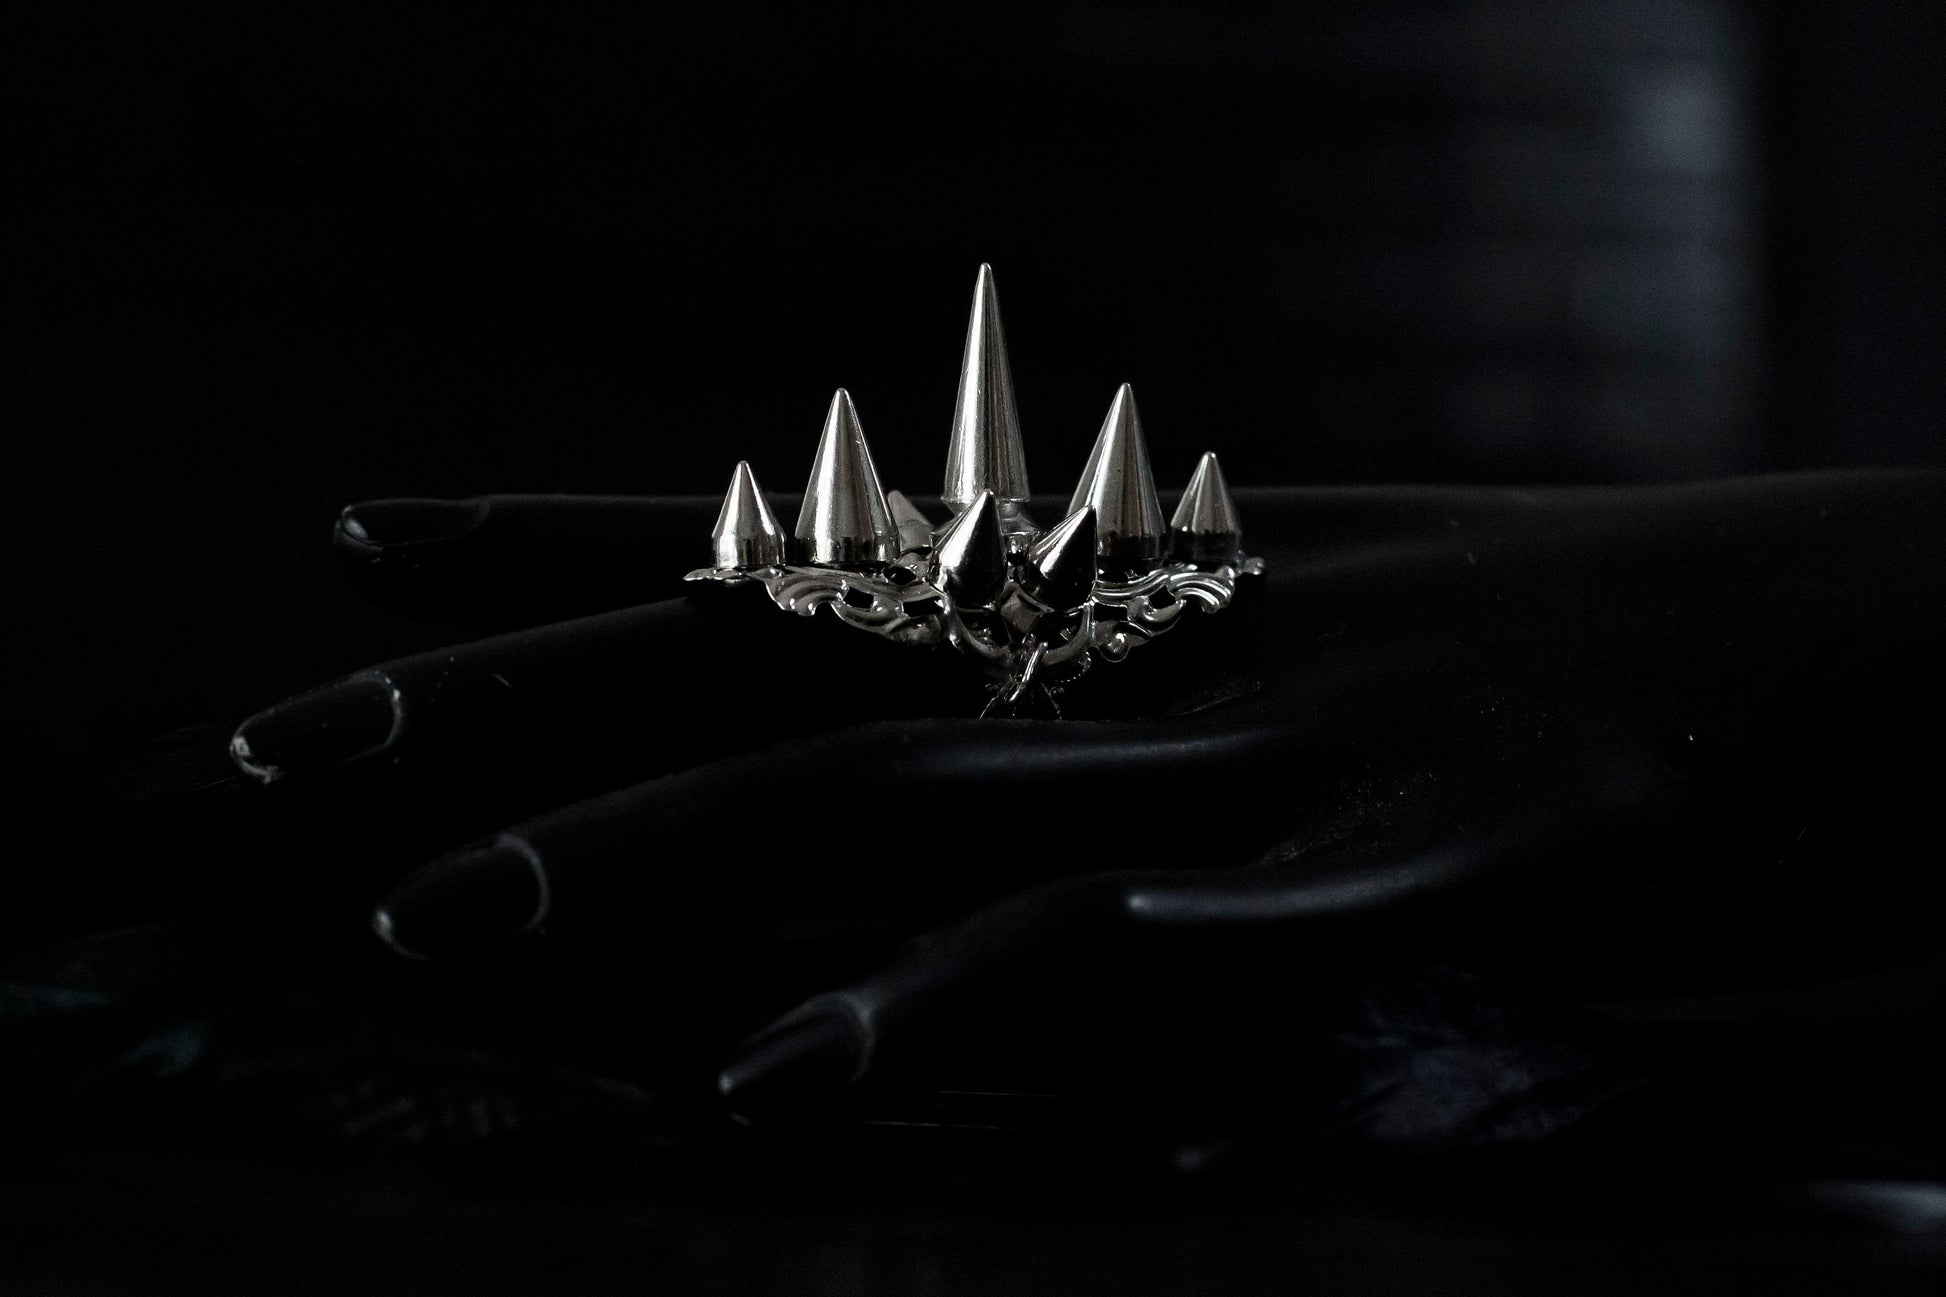 this Myril Jewels silver punk studded ring makes a bold statement with its sharp, gleaming spikes and intricate filigree detailing. Crafted for the dark avant-garde jewelry aficionado, it's a piece that commands attention, perfect for Halloween, embracing the Neo Gothic vibe, or elevating everyday wear with a touch of gothic-chic. Ideal for those who identify with the Whimsigoth or Witchcore aesthetic, or for anyone looking to add an edge to their minimal goth style.